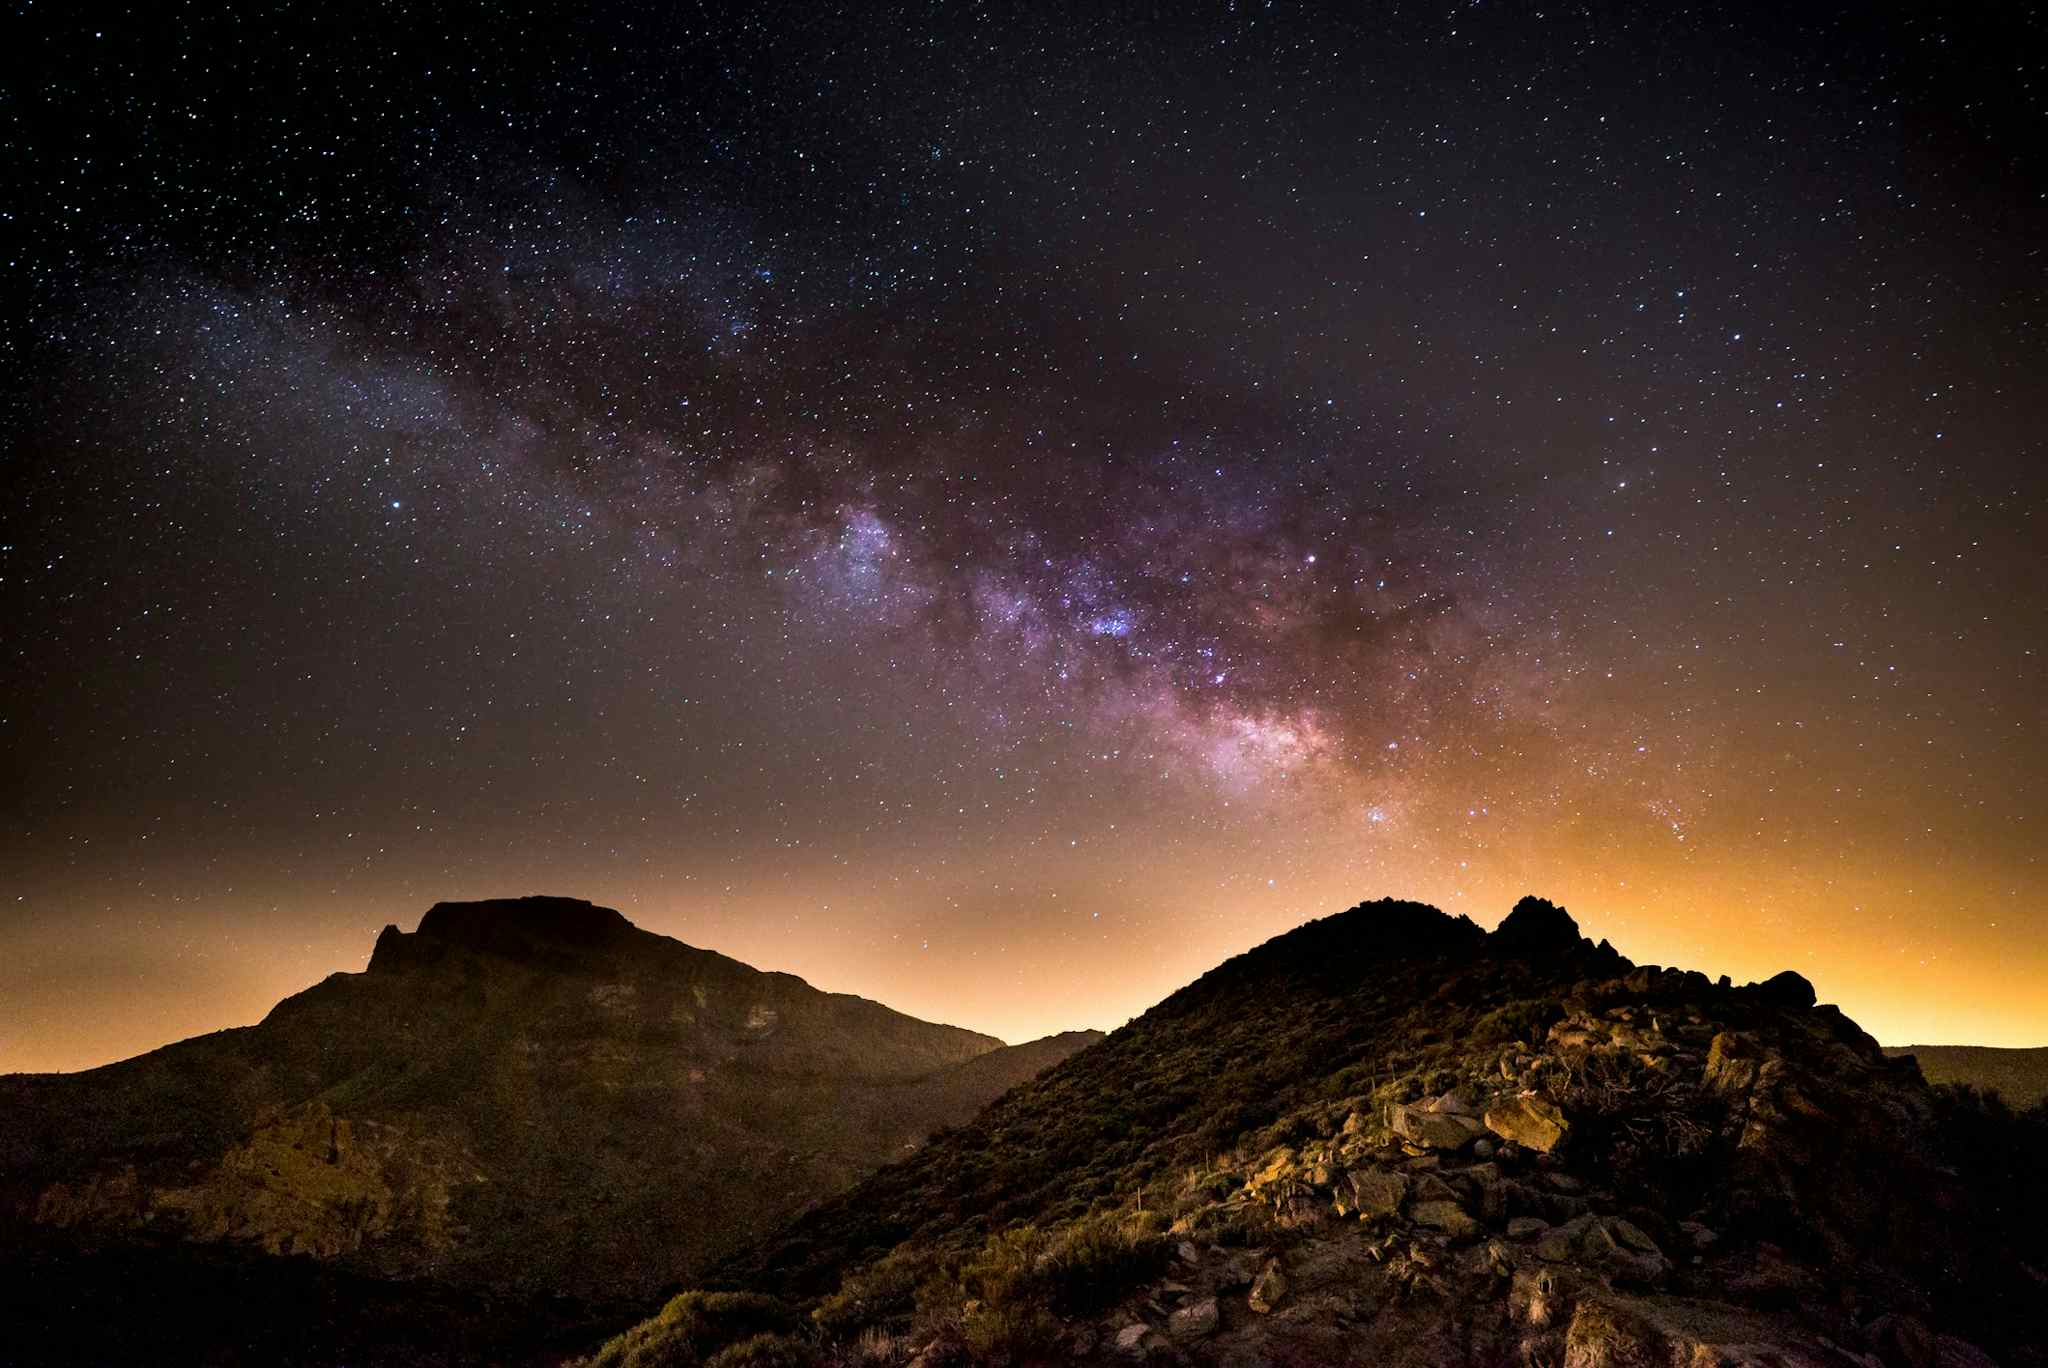 Starry sky at night with orange and purple light and the volcanic landscape of Tenerife below